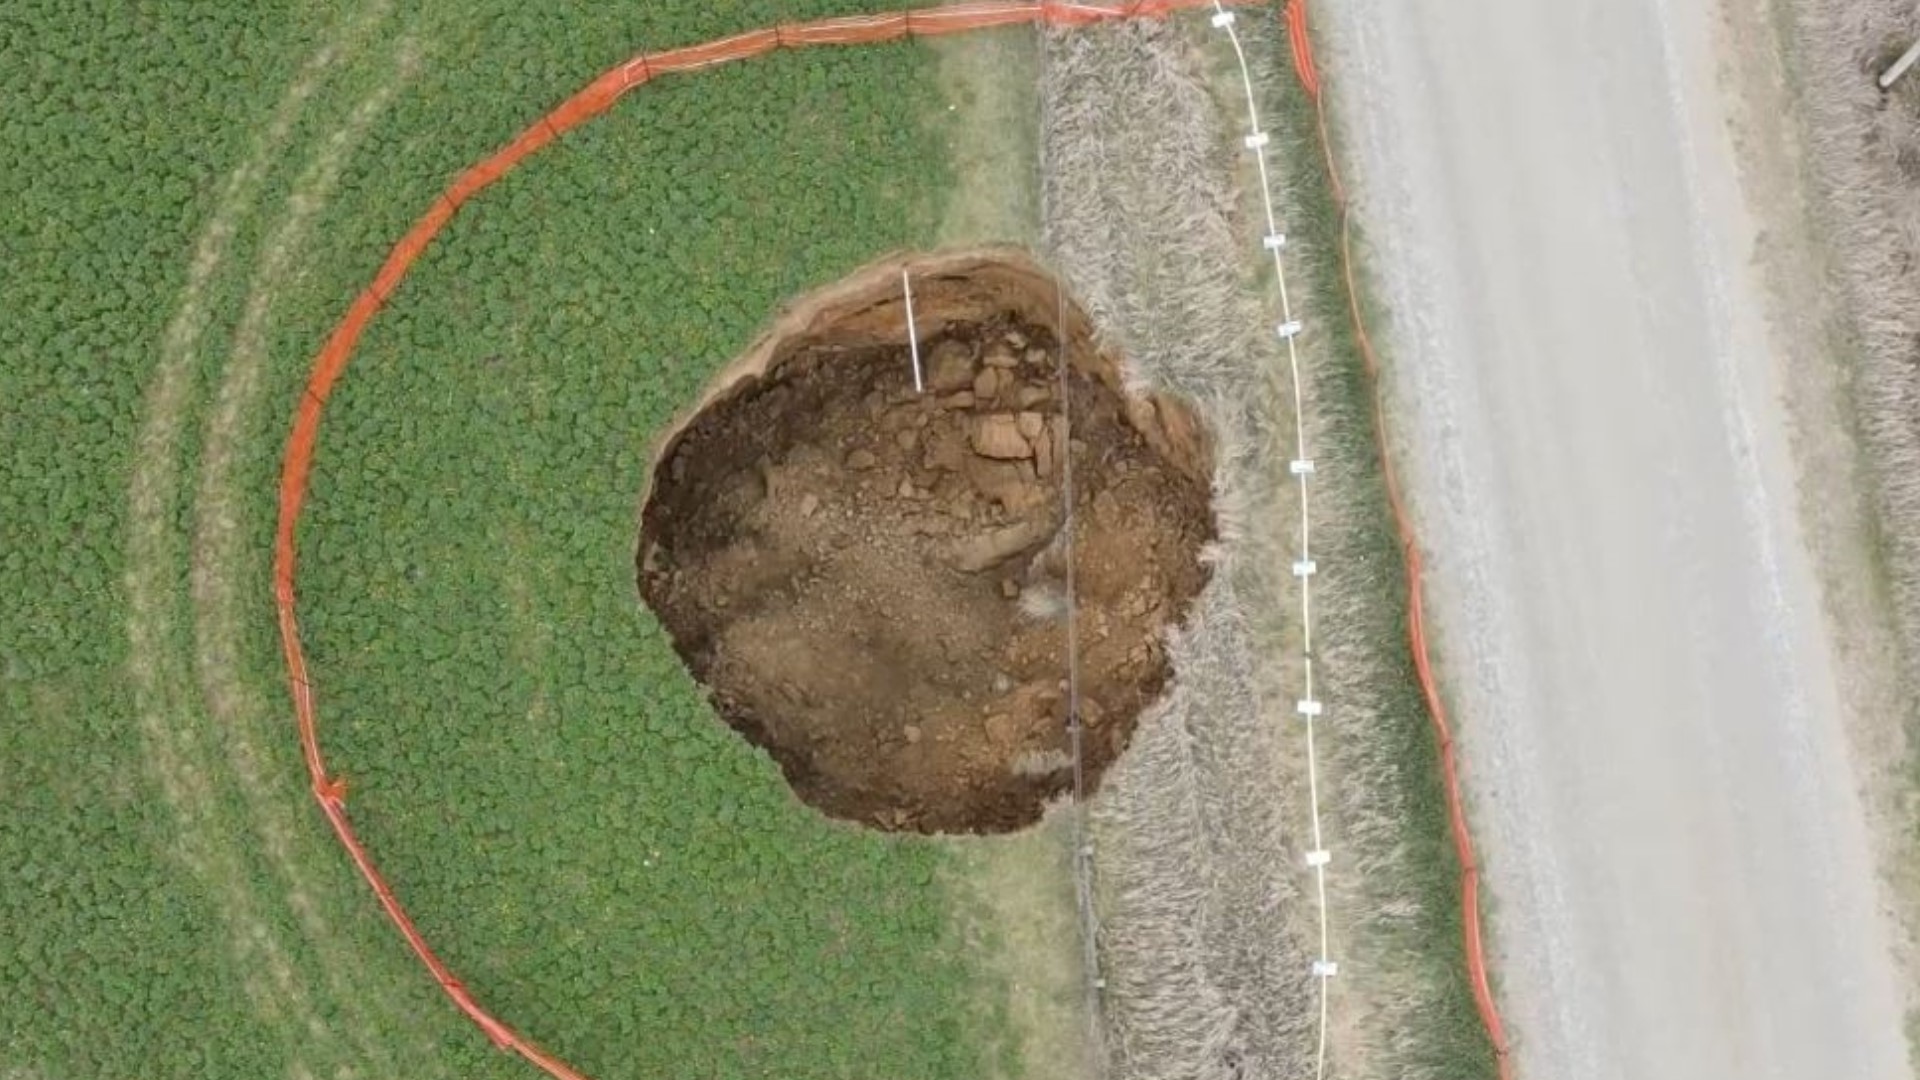 The cause of the sinkhole is currently unknown.